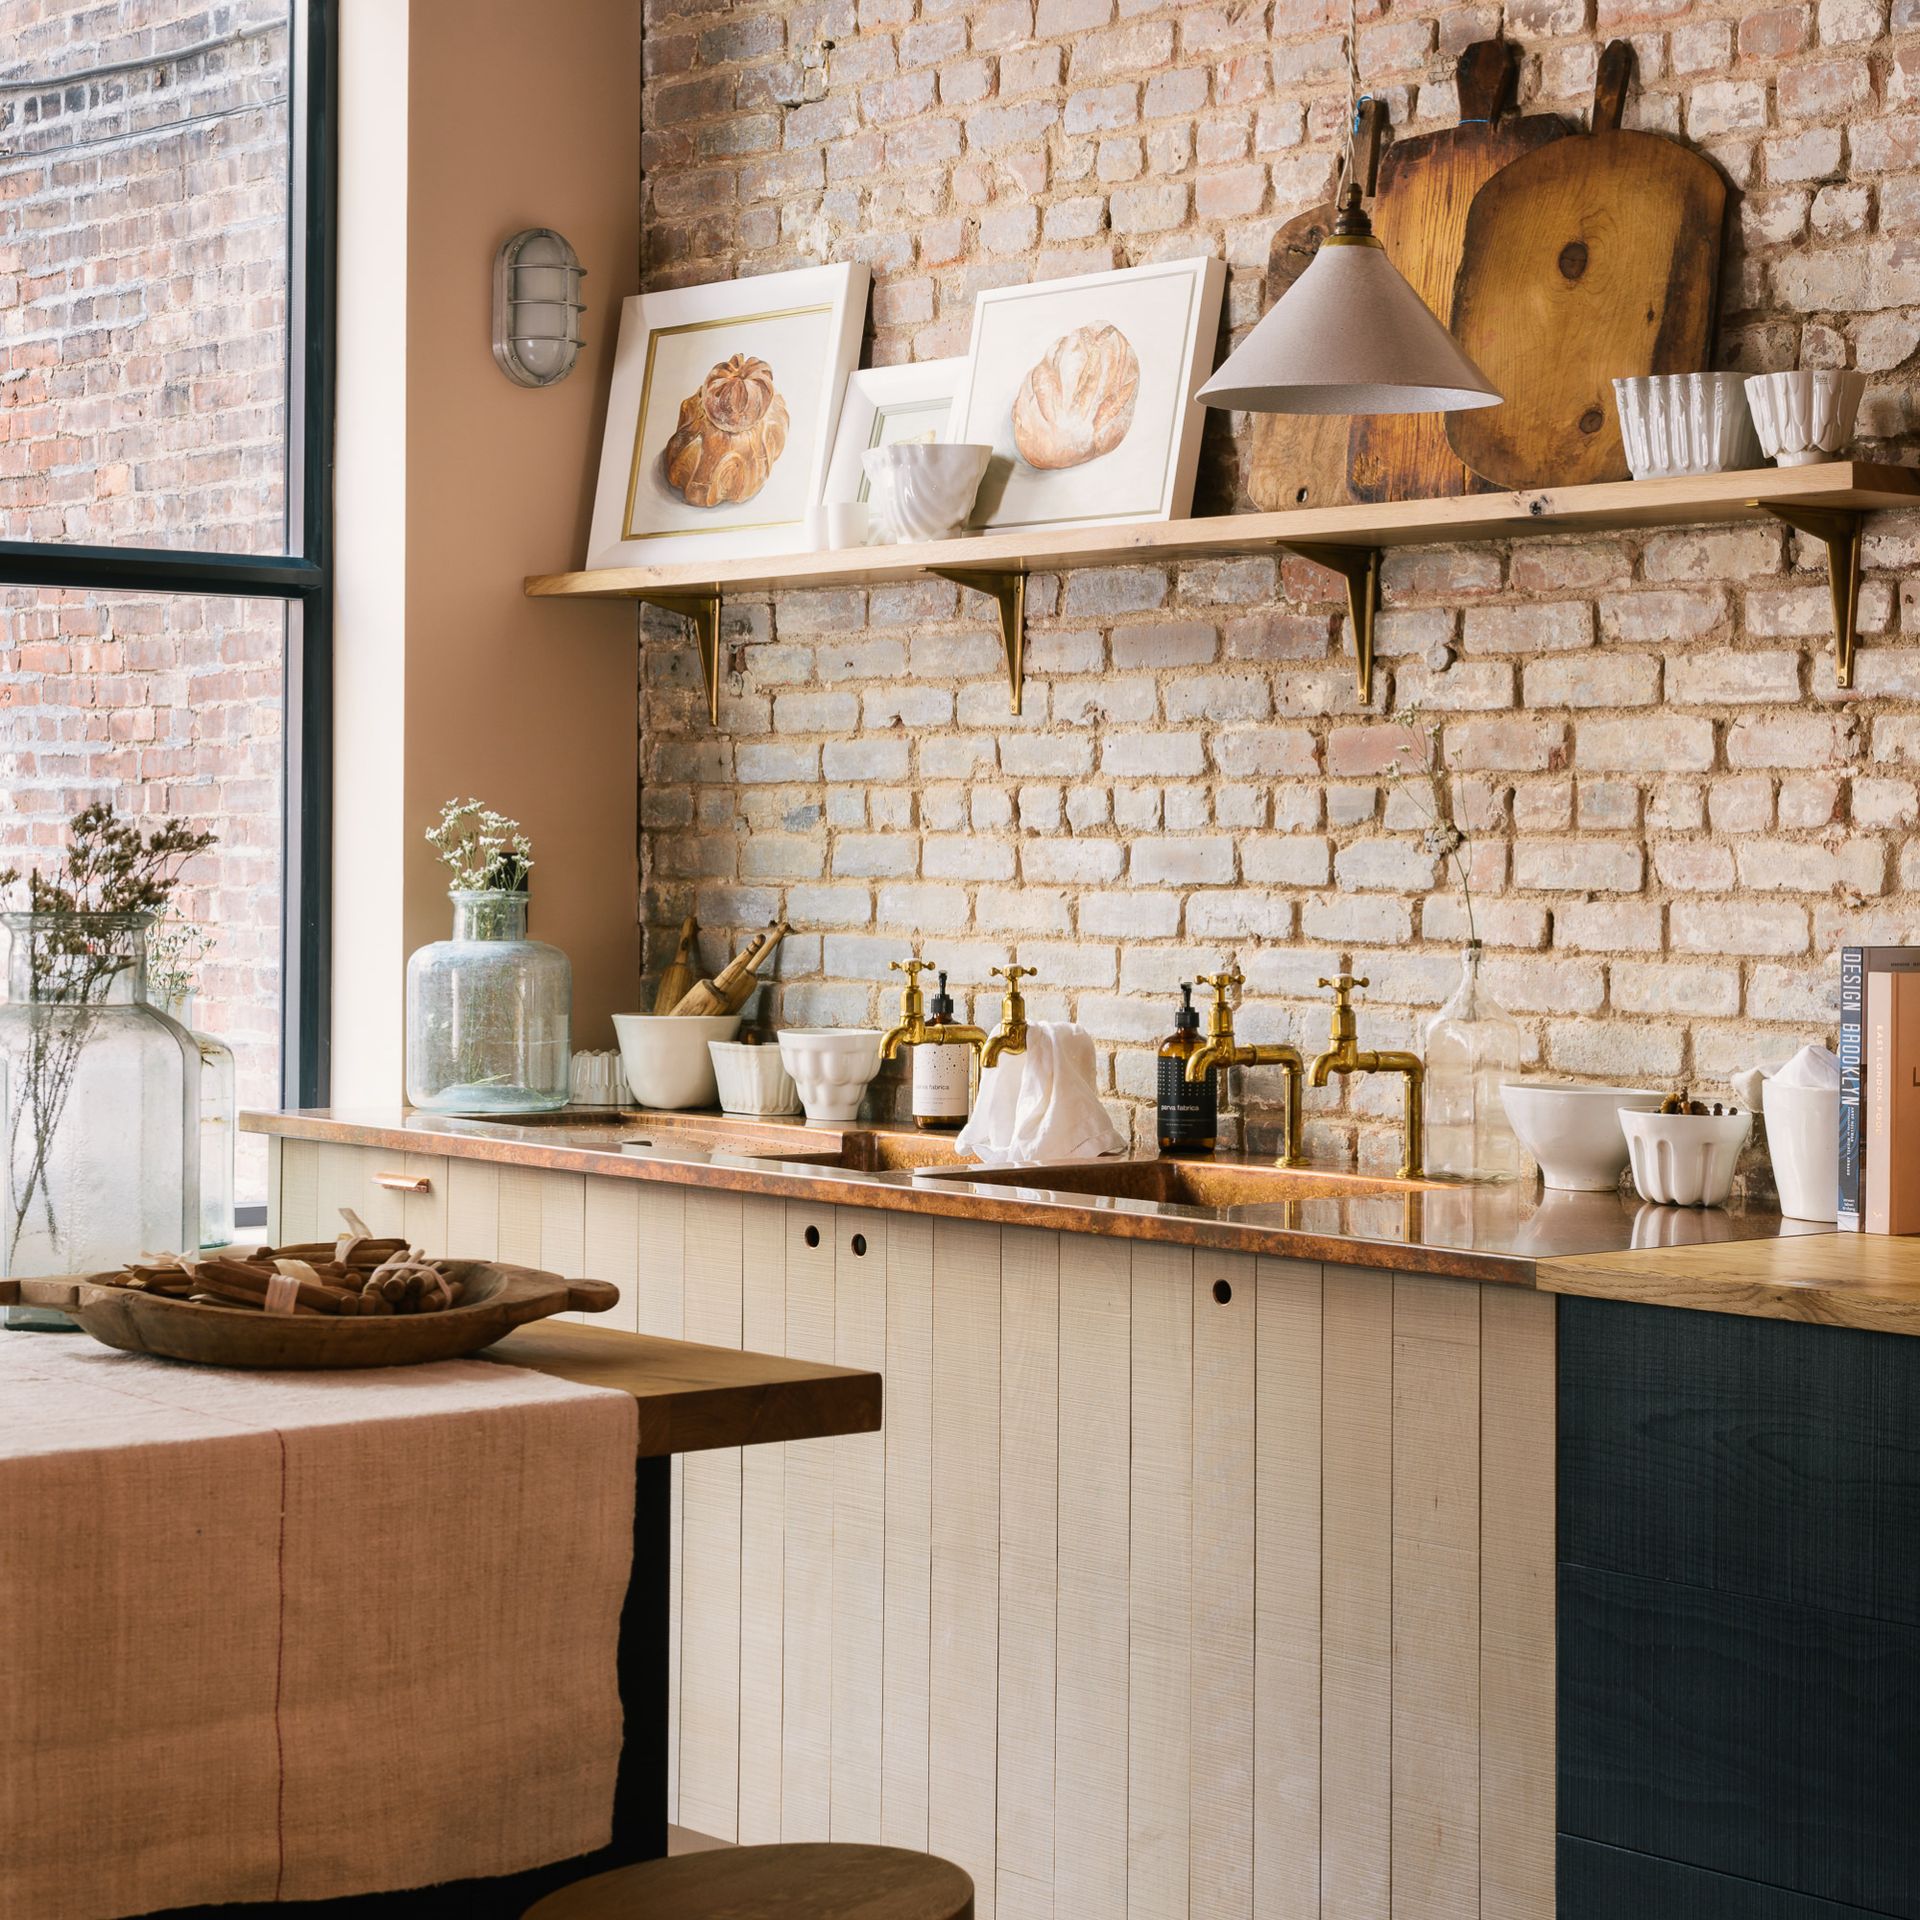 28 rustic kitchen ideas for one-off rural charm | Ideal Home